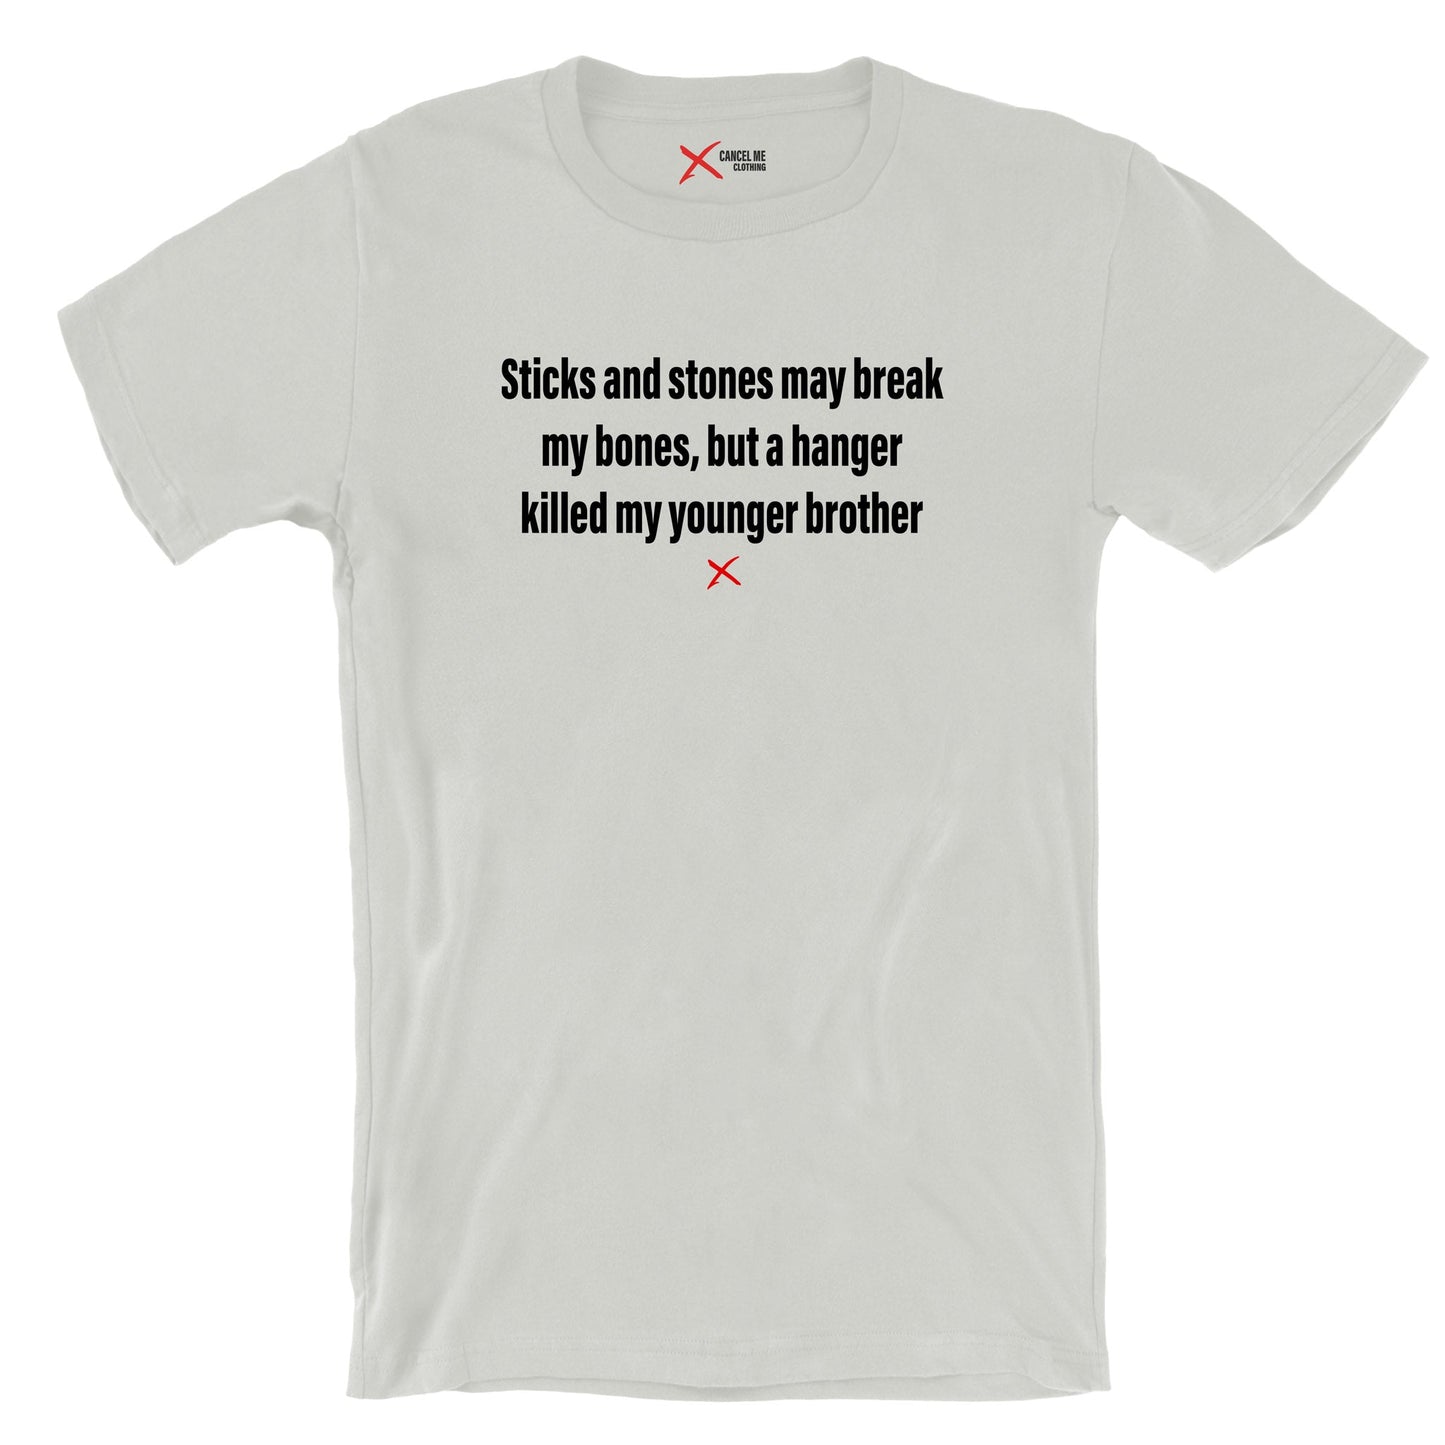 Sticks and stones may break my bones, but a hanger killed my younger brother - Shirt